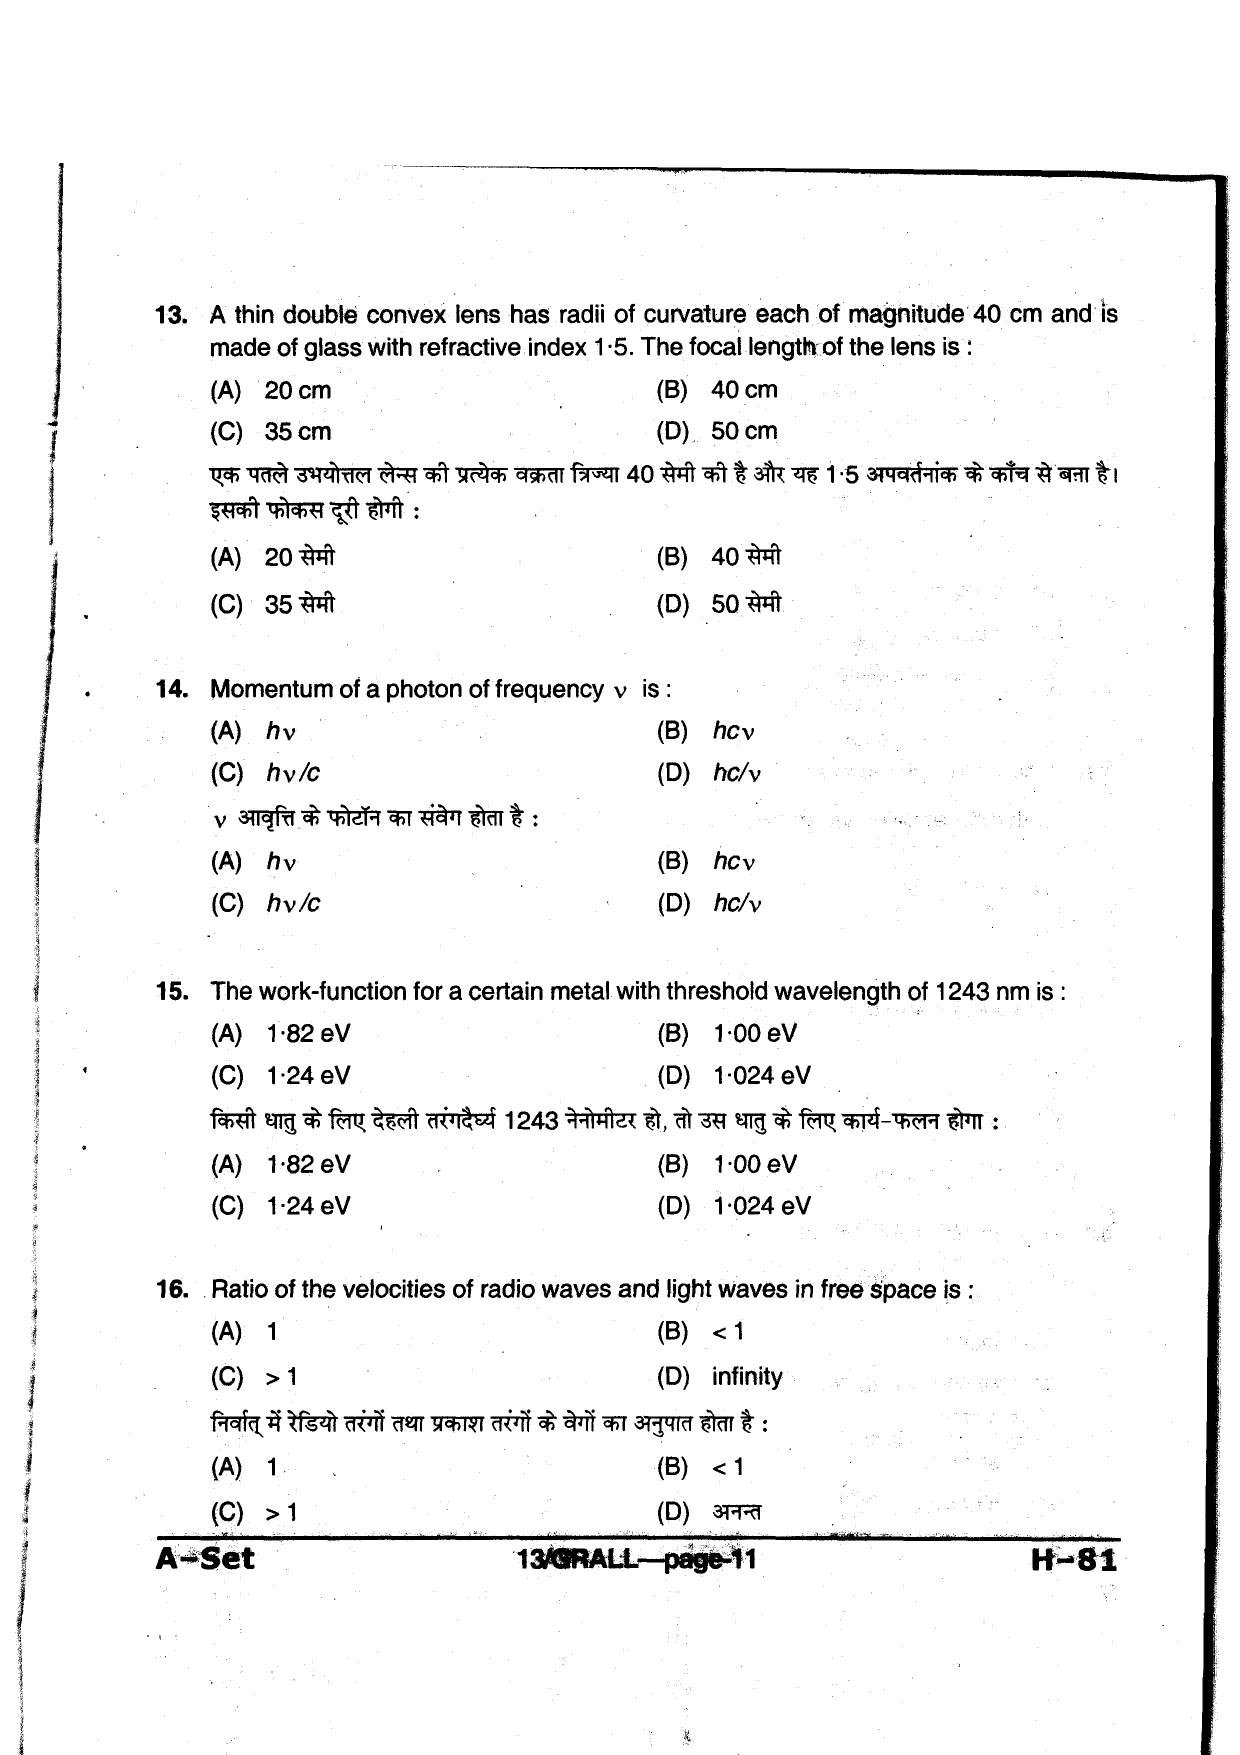 MP PAT 2013 Question Paper - Paper I - Page 11